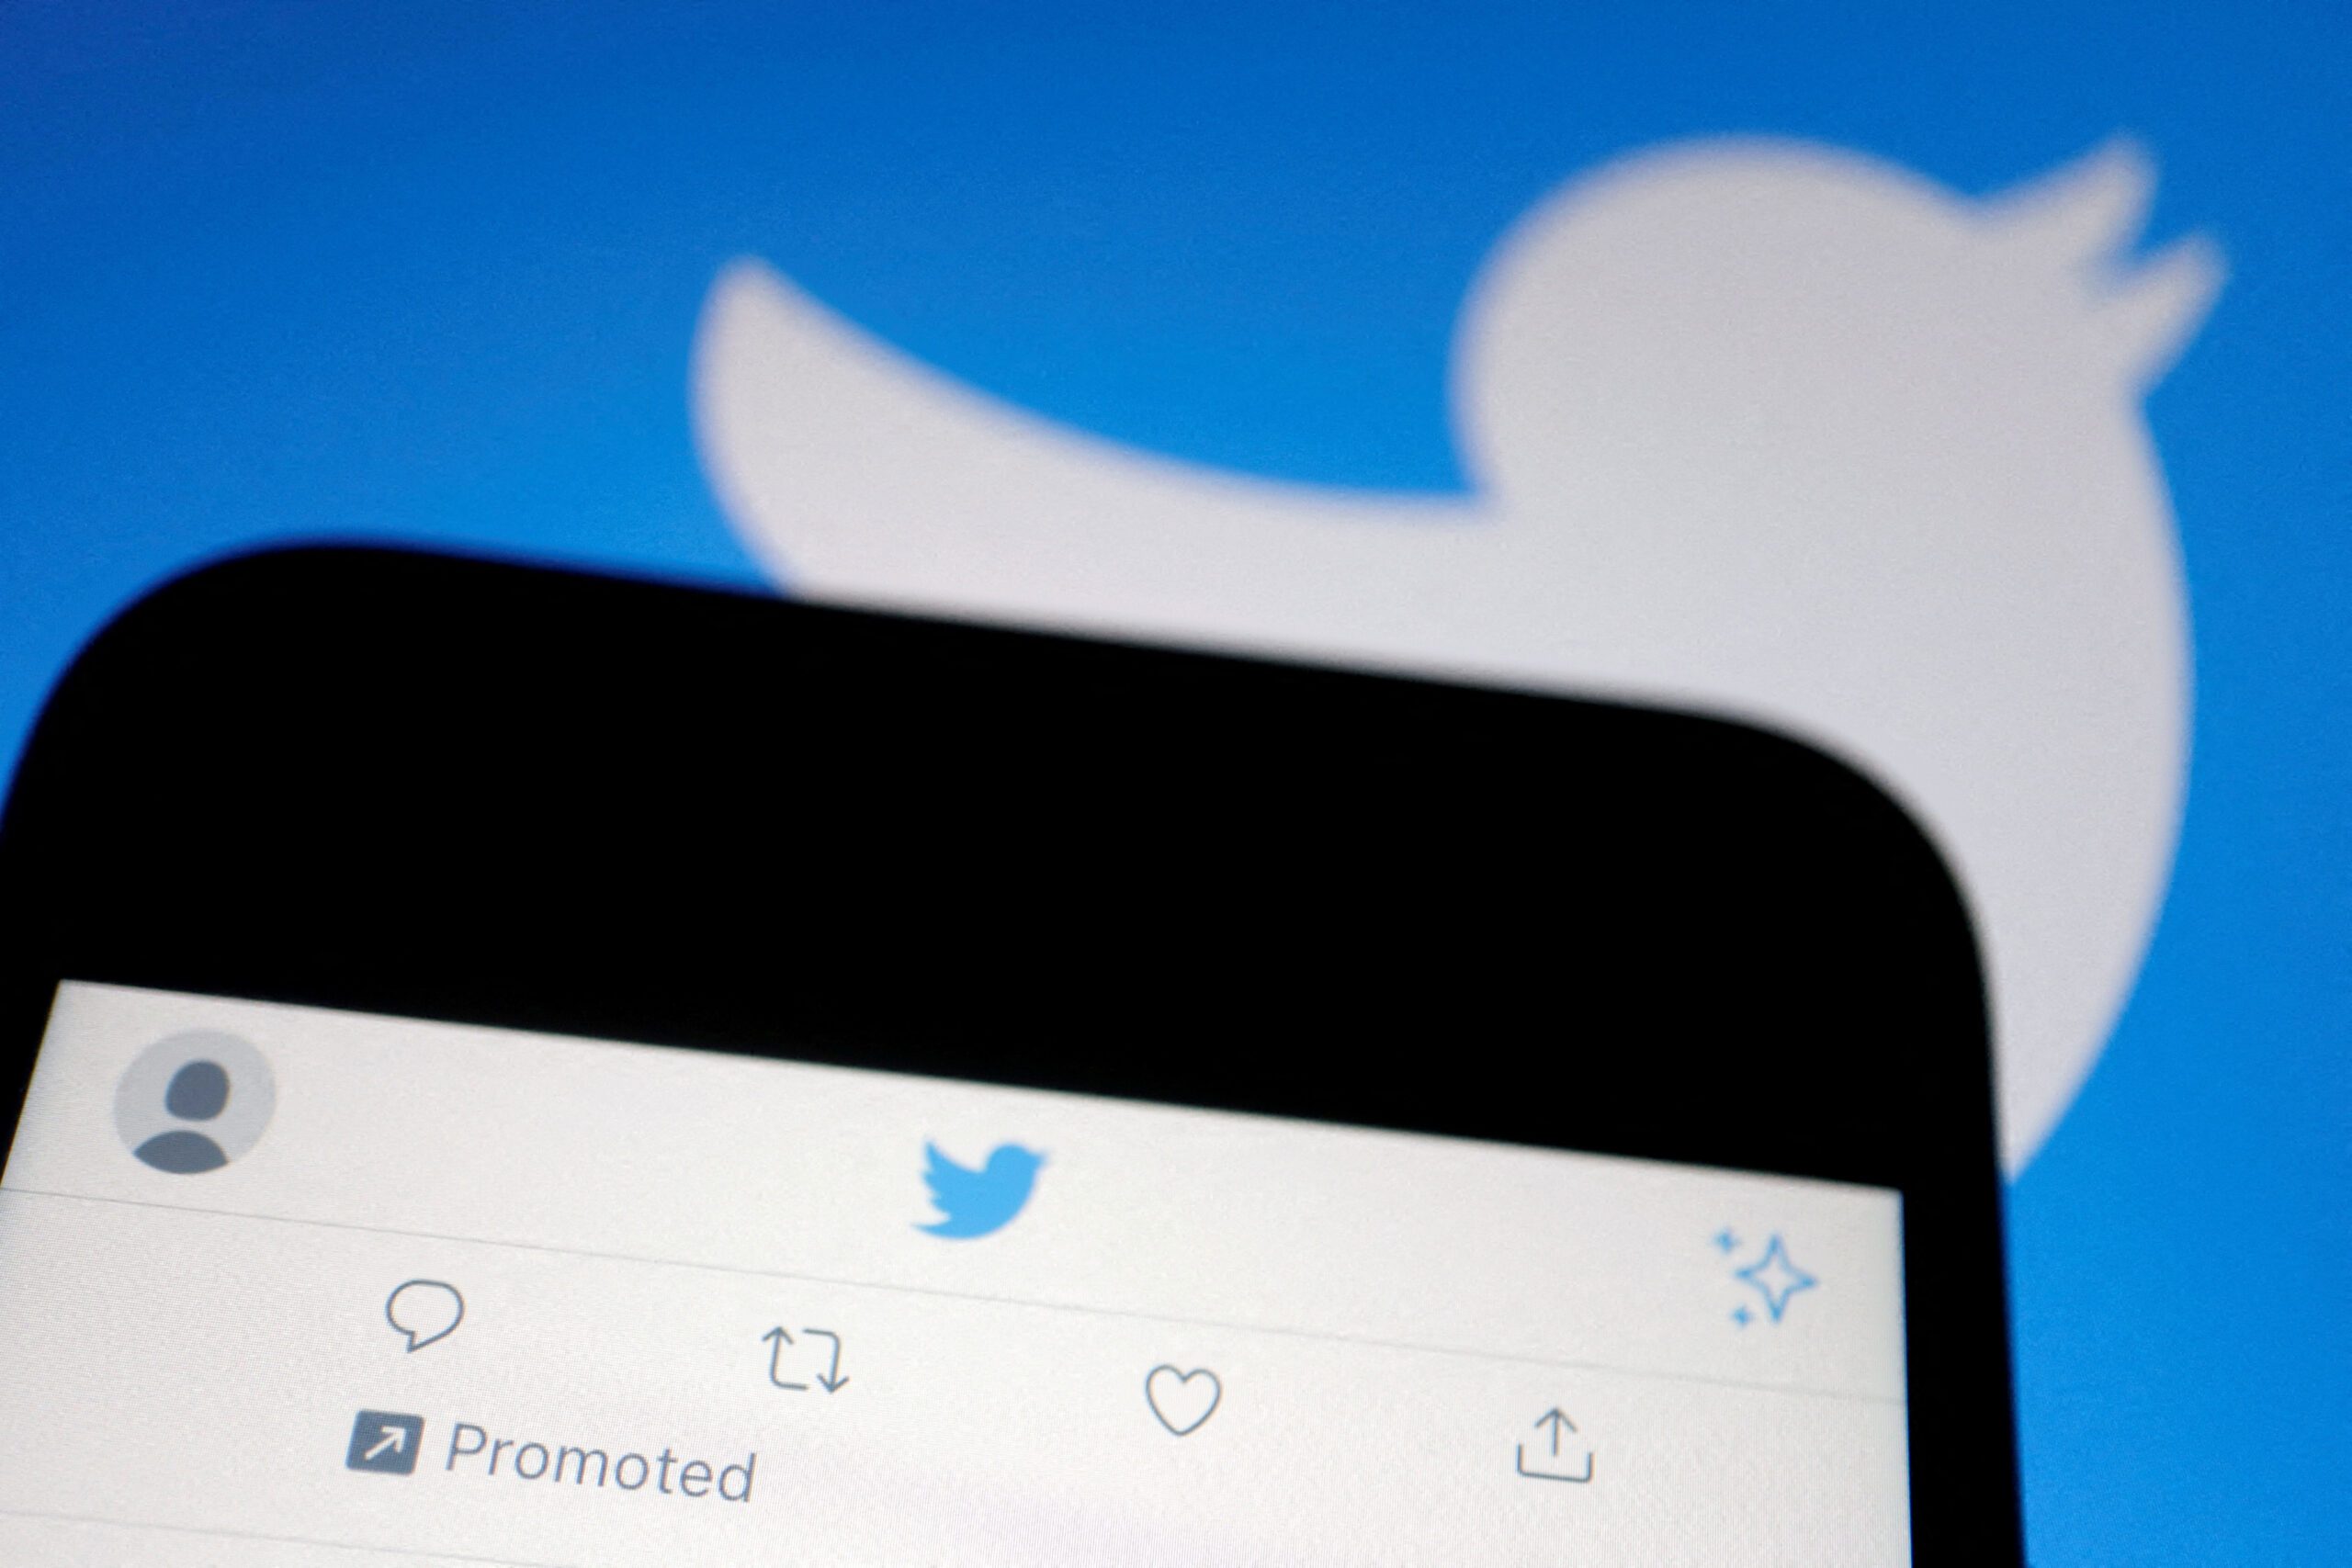 Twitter tells employees there are no plans for layoffs